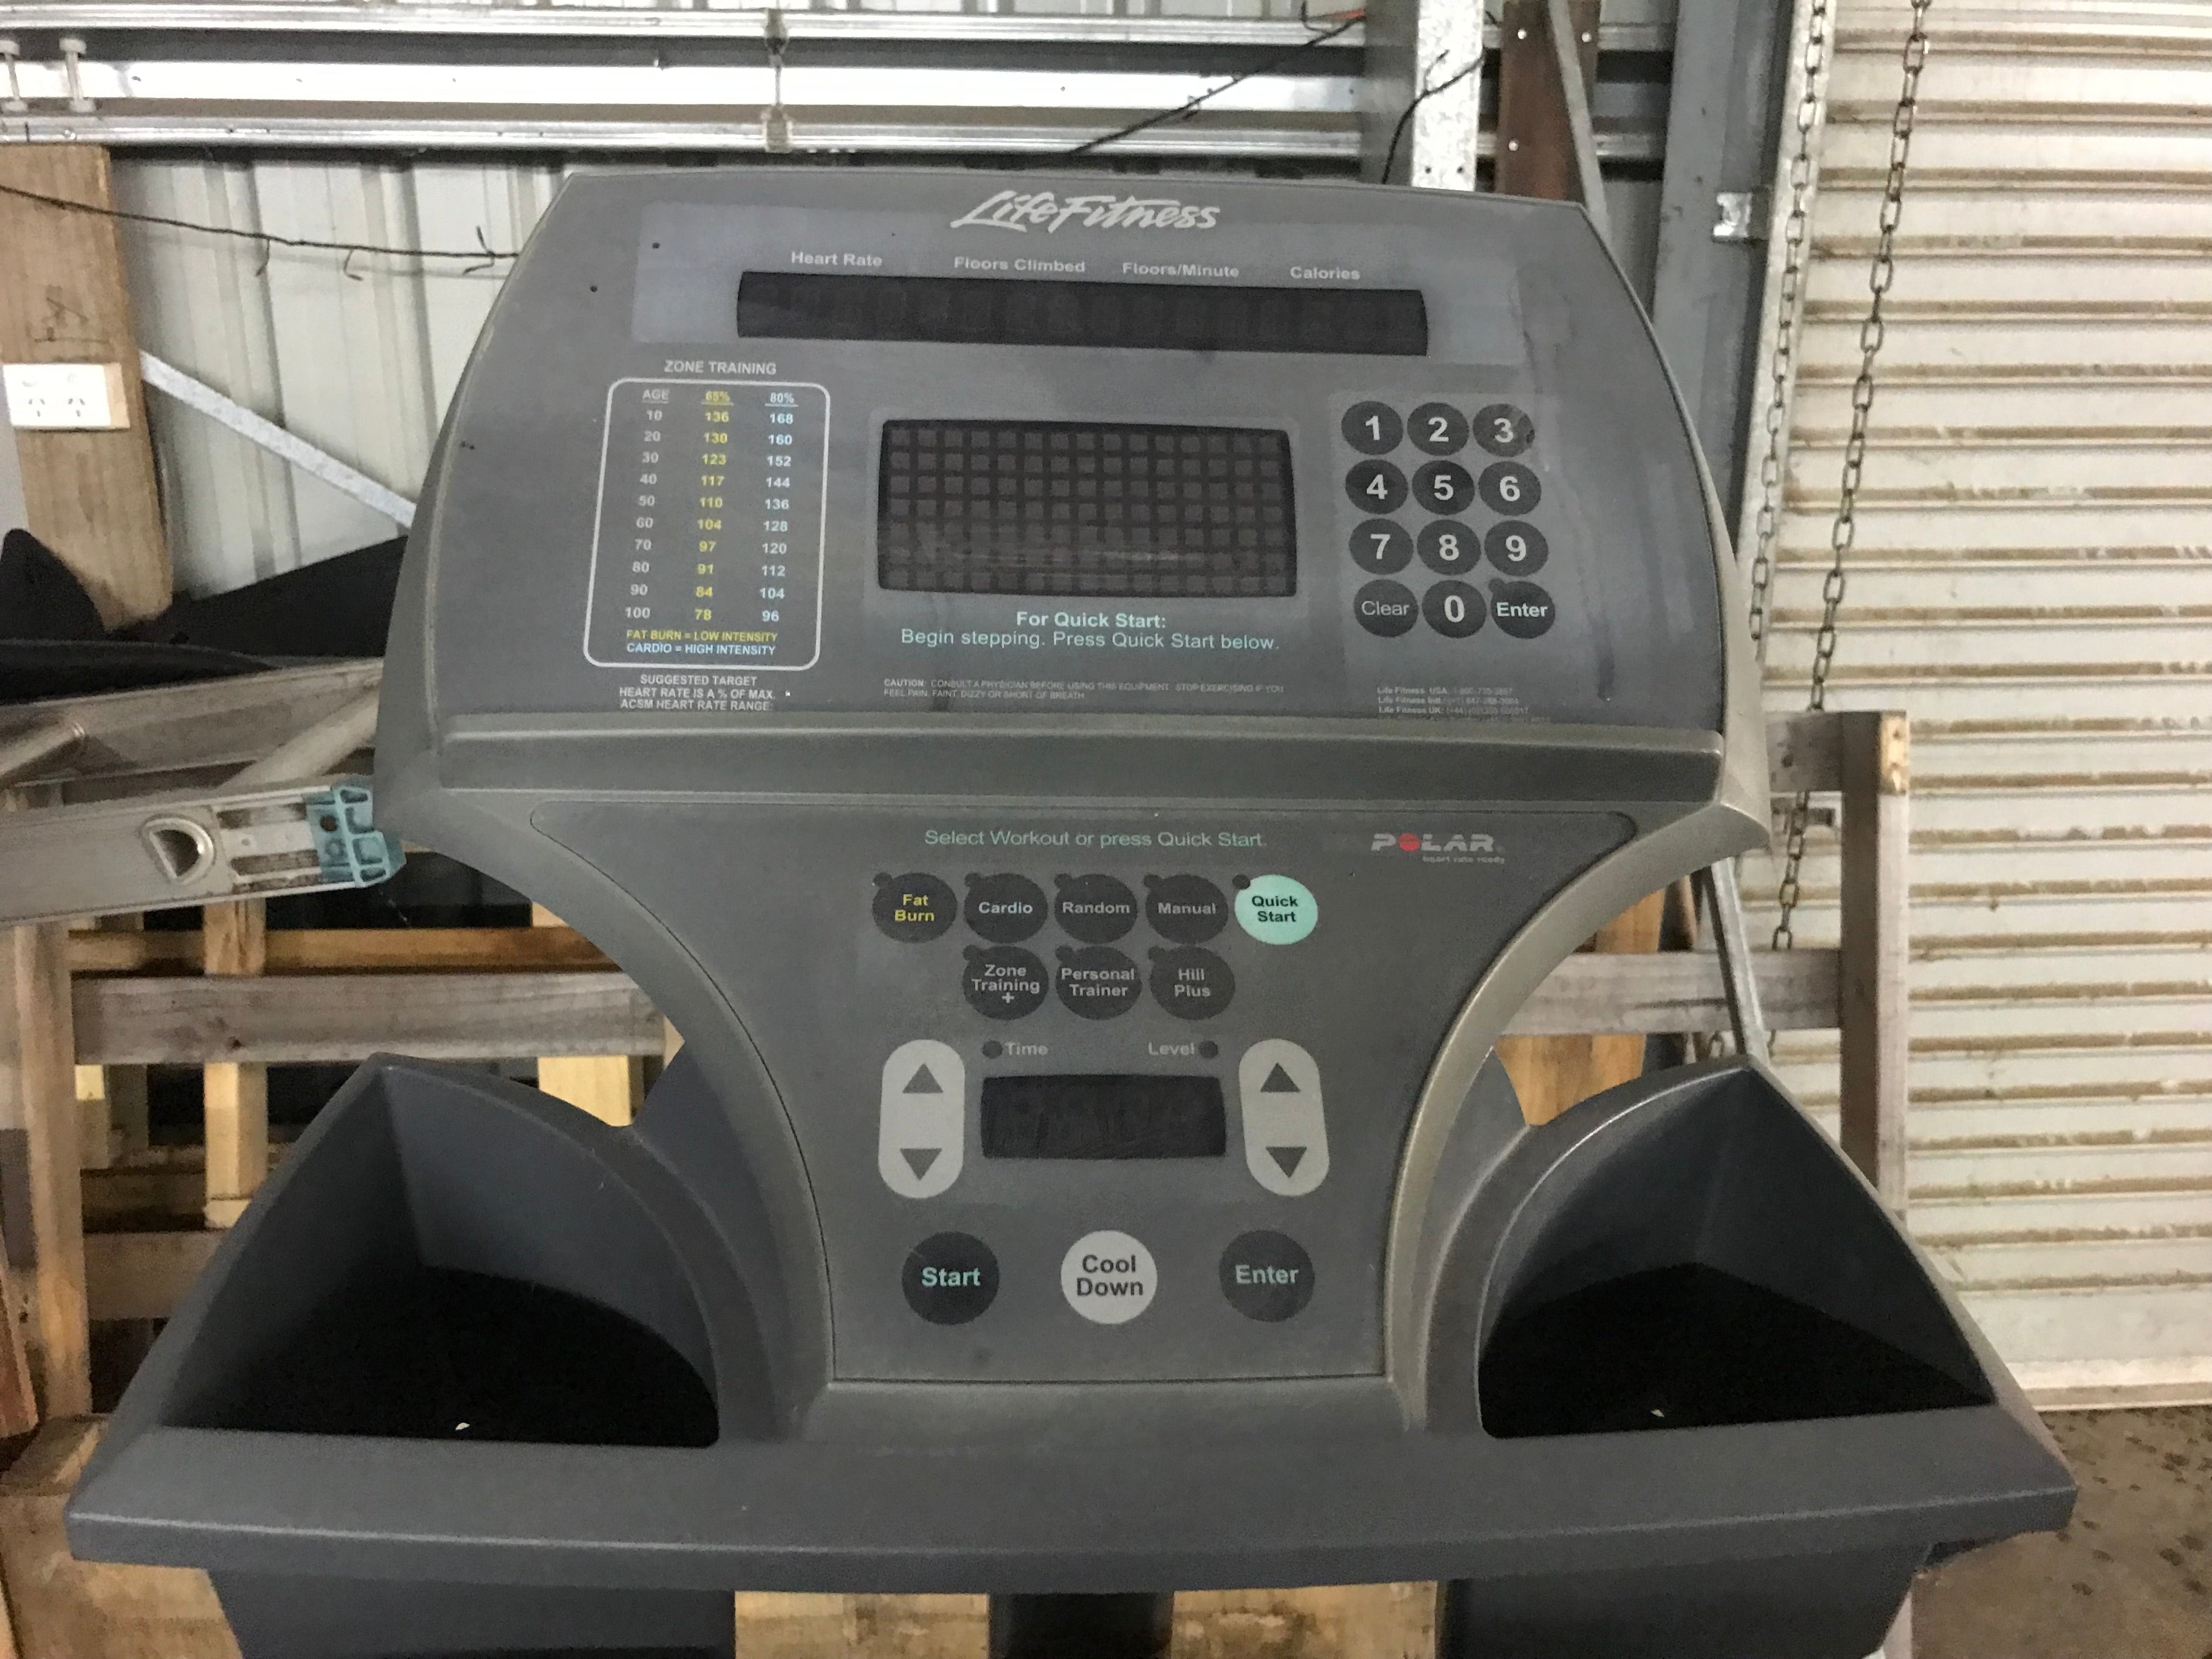 Life Fitness 95Si Stair Stepper